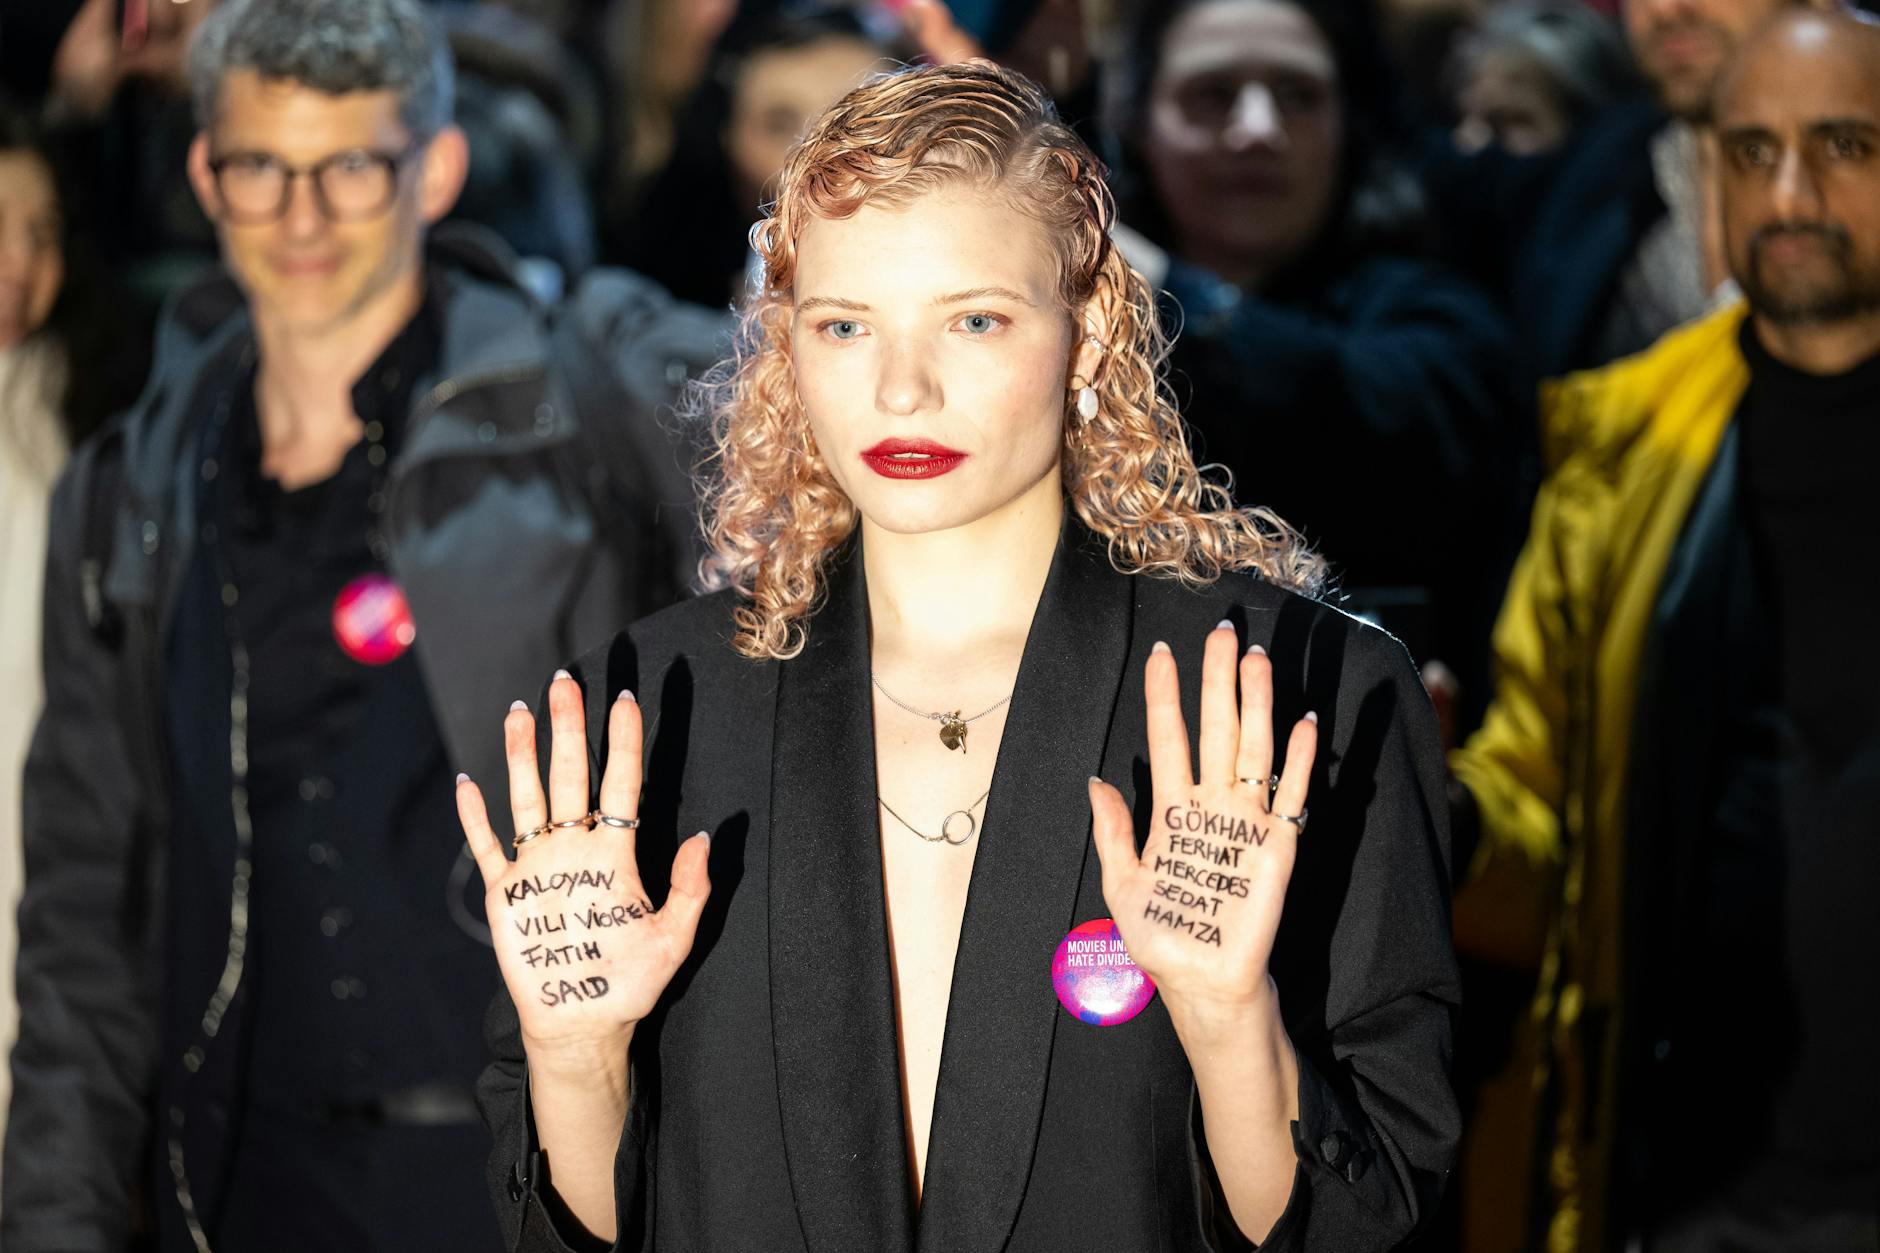 Actress Luisa-Céline Gaffron wrote the names of the victims of the right-wing extremist terrorist attack in Hanau on her hands.